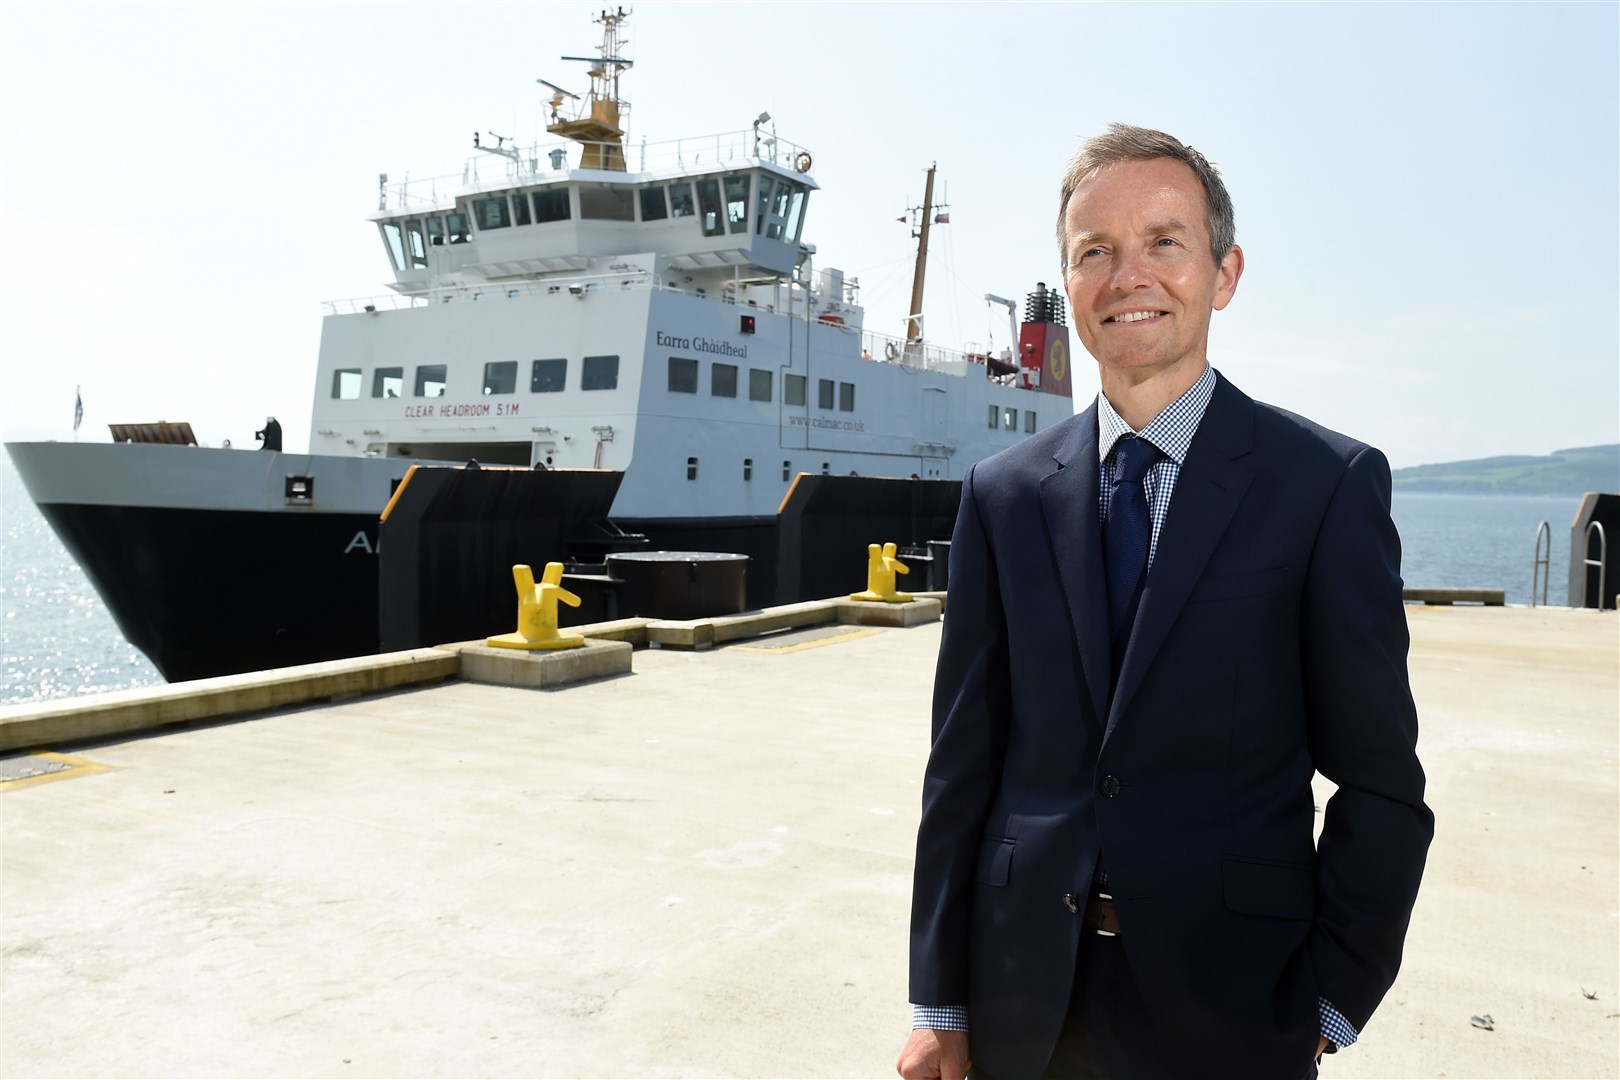 CalMac managing director Robbie Drummond: 'We want to assure customers we are doing all we can to deliver the timetables as quickly as possible and want to thank customers and communities for their patience as they bear with us through this period.'